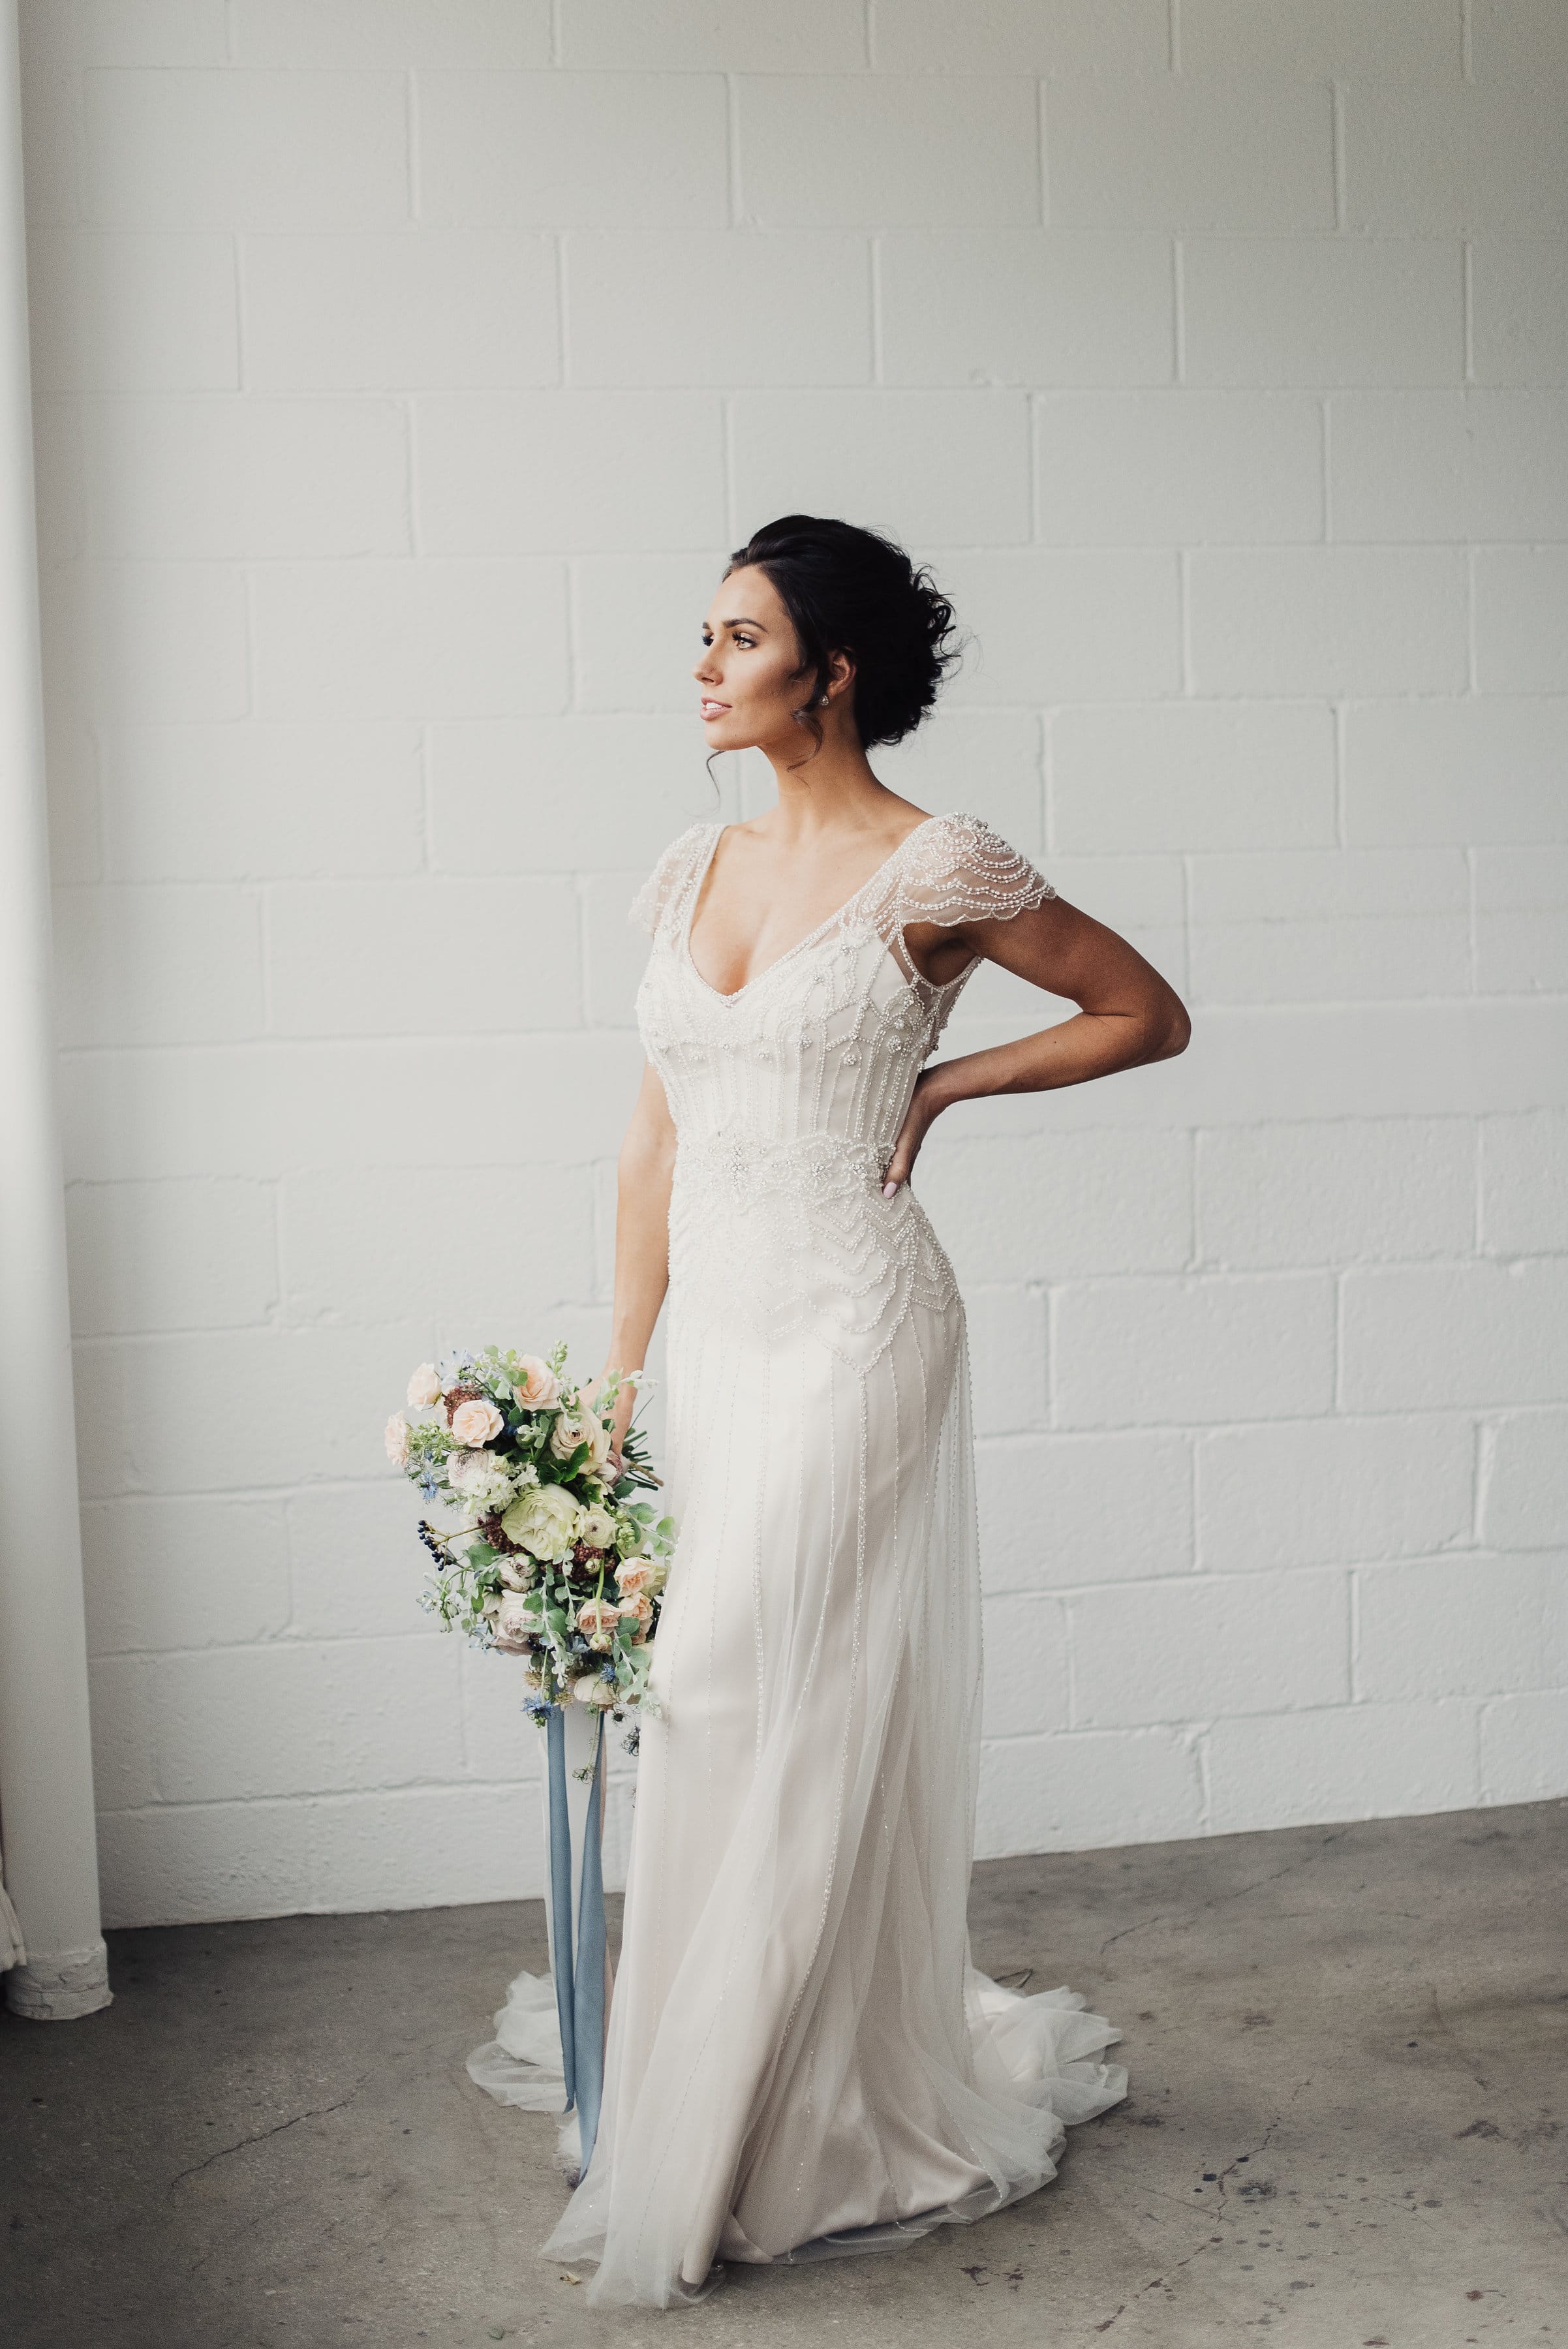 Something Blue Shoot with 3 Vintage-inspired Wedding Dresses - Ettia by Maggie Sottero.